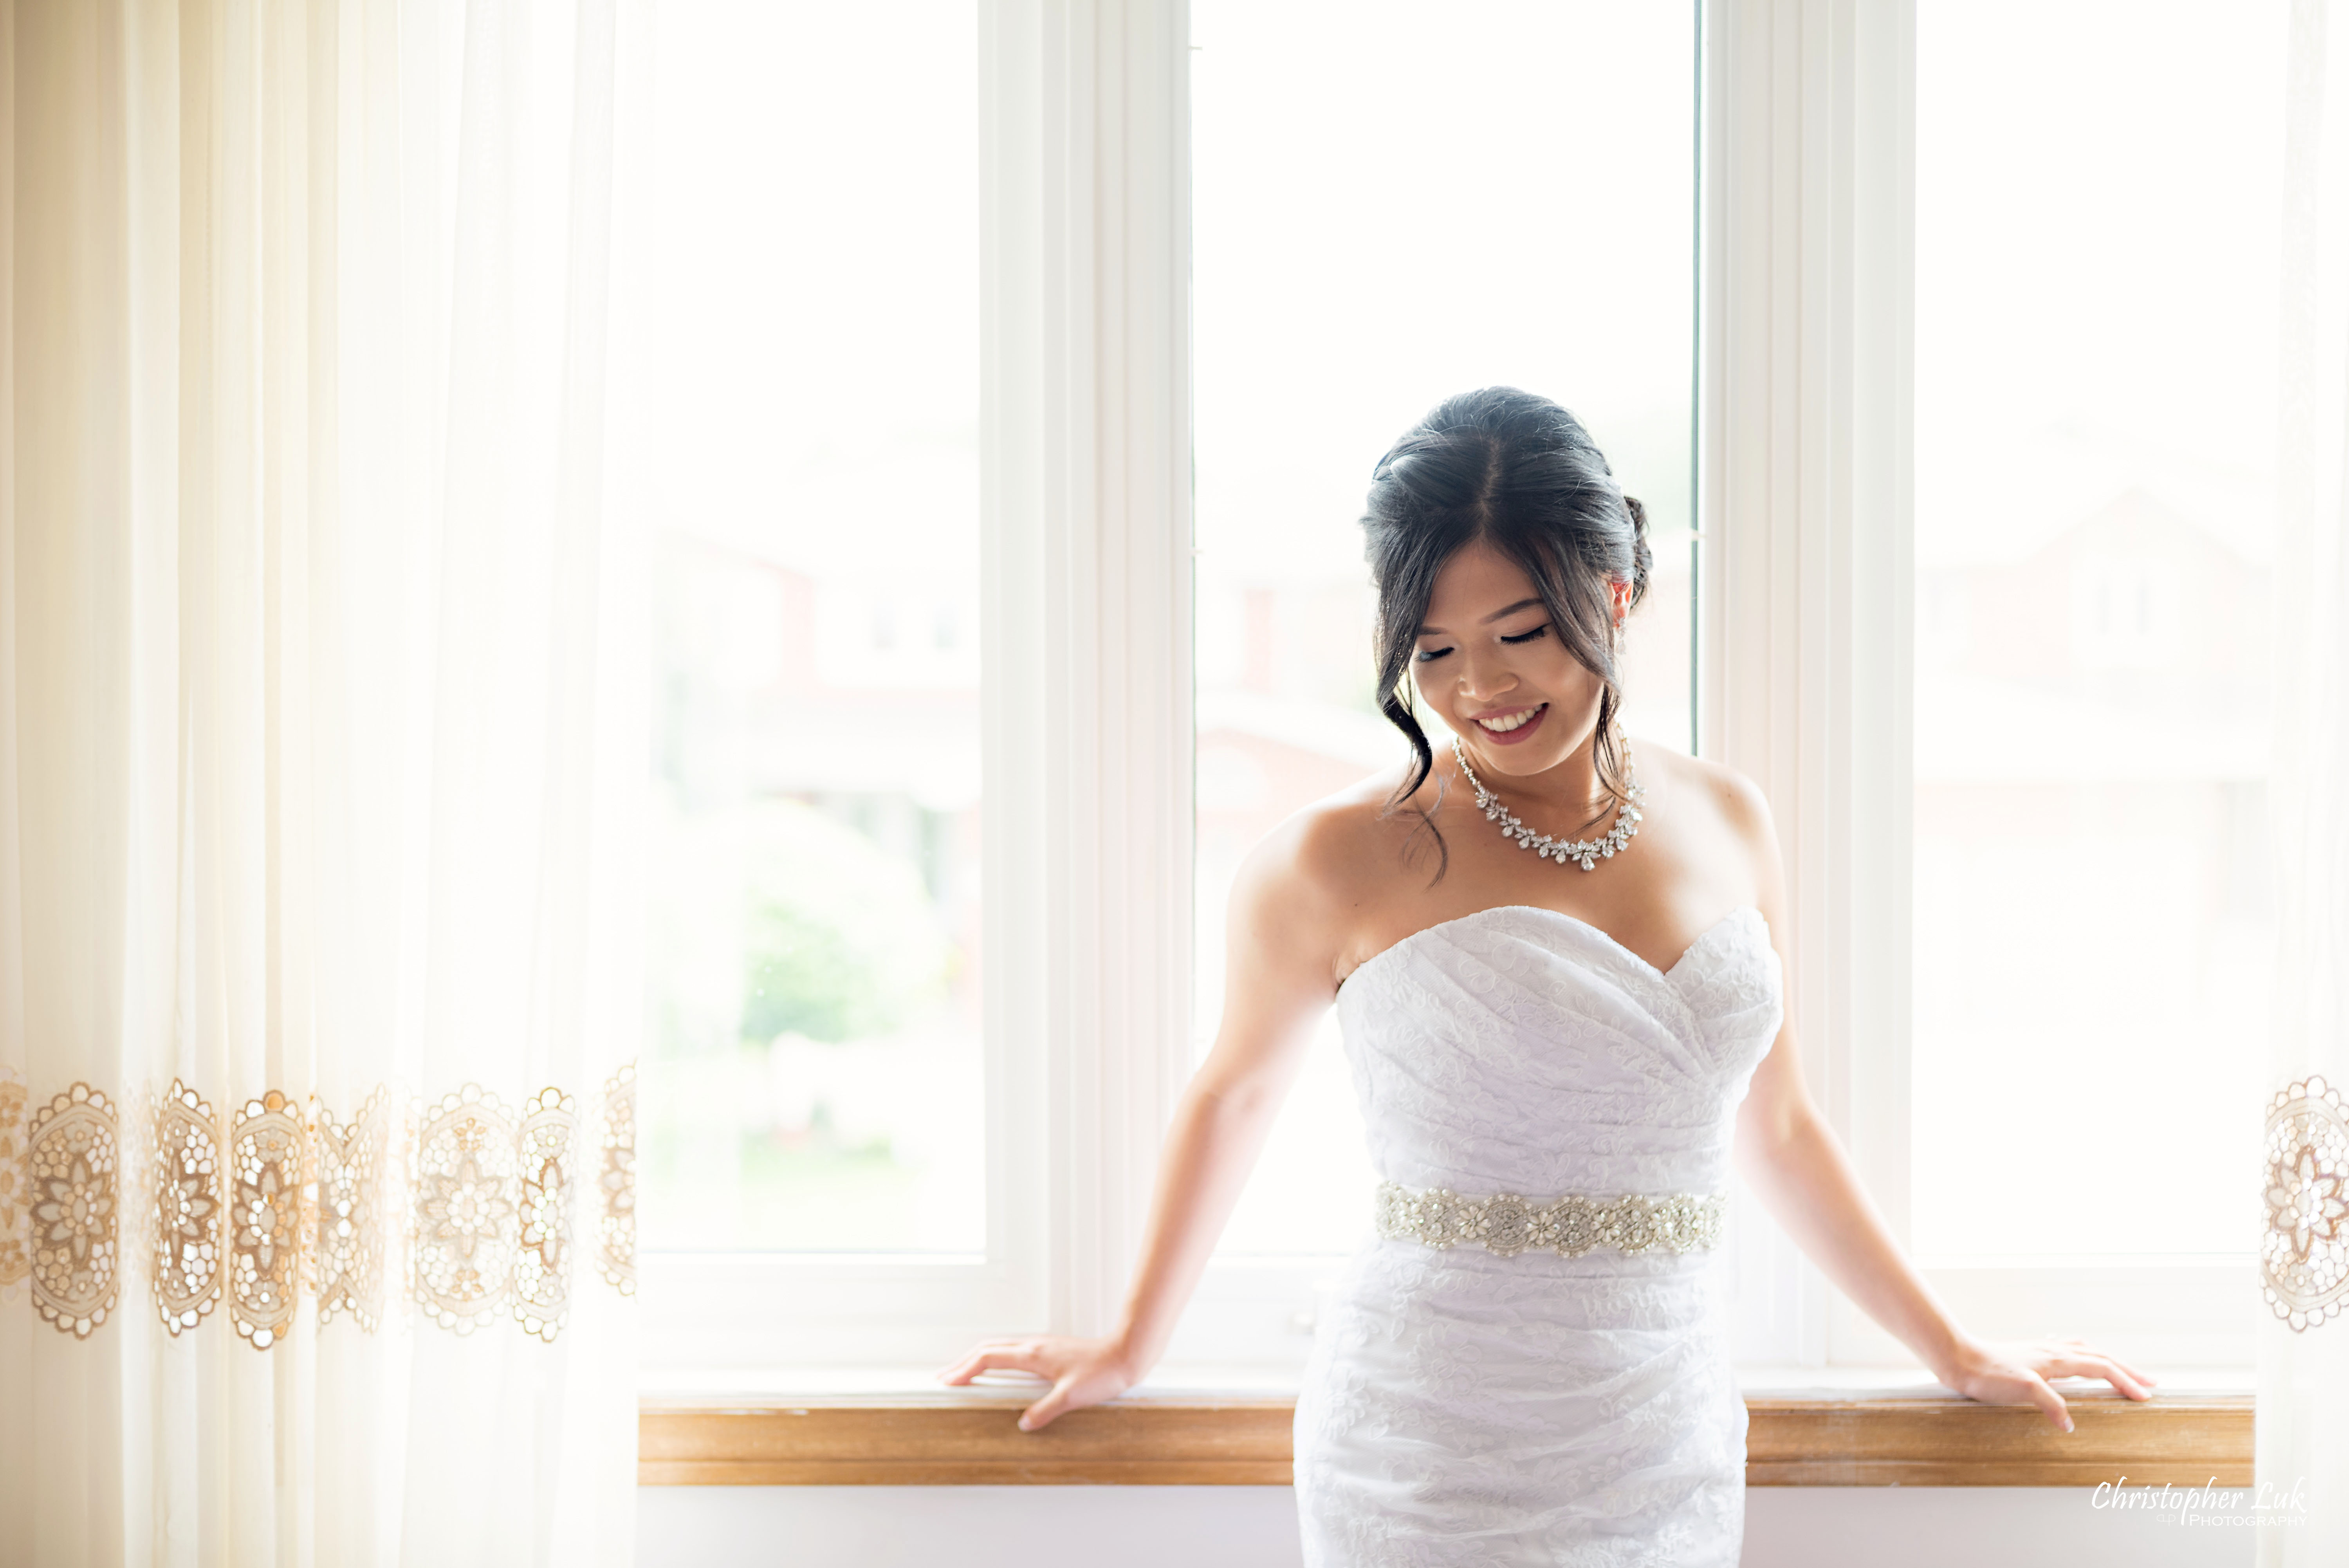 Christopher Luk - Toronto Wedding Photographer - Markham Home Private Residence Bride Alfred Angelo from Joanna’s Bridal Natural Candid Photojournalistic Creative Curtains Portrait